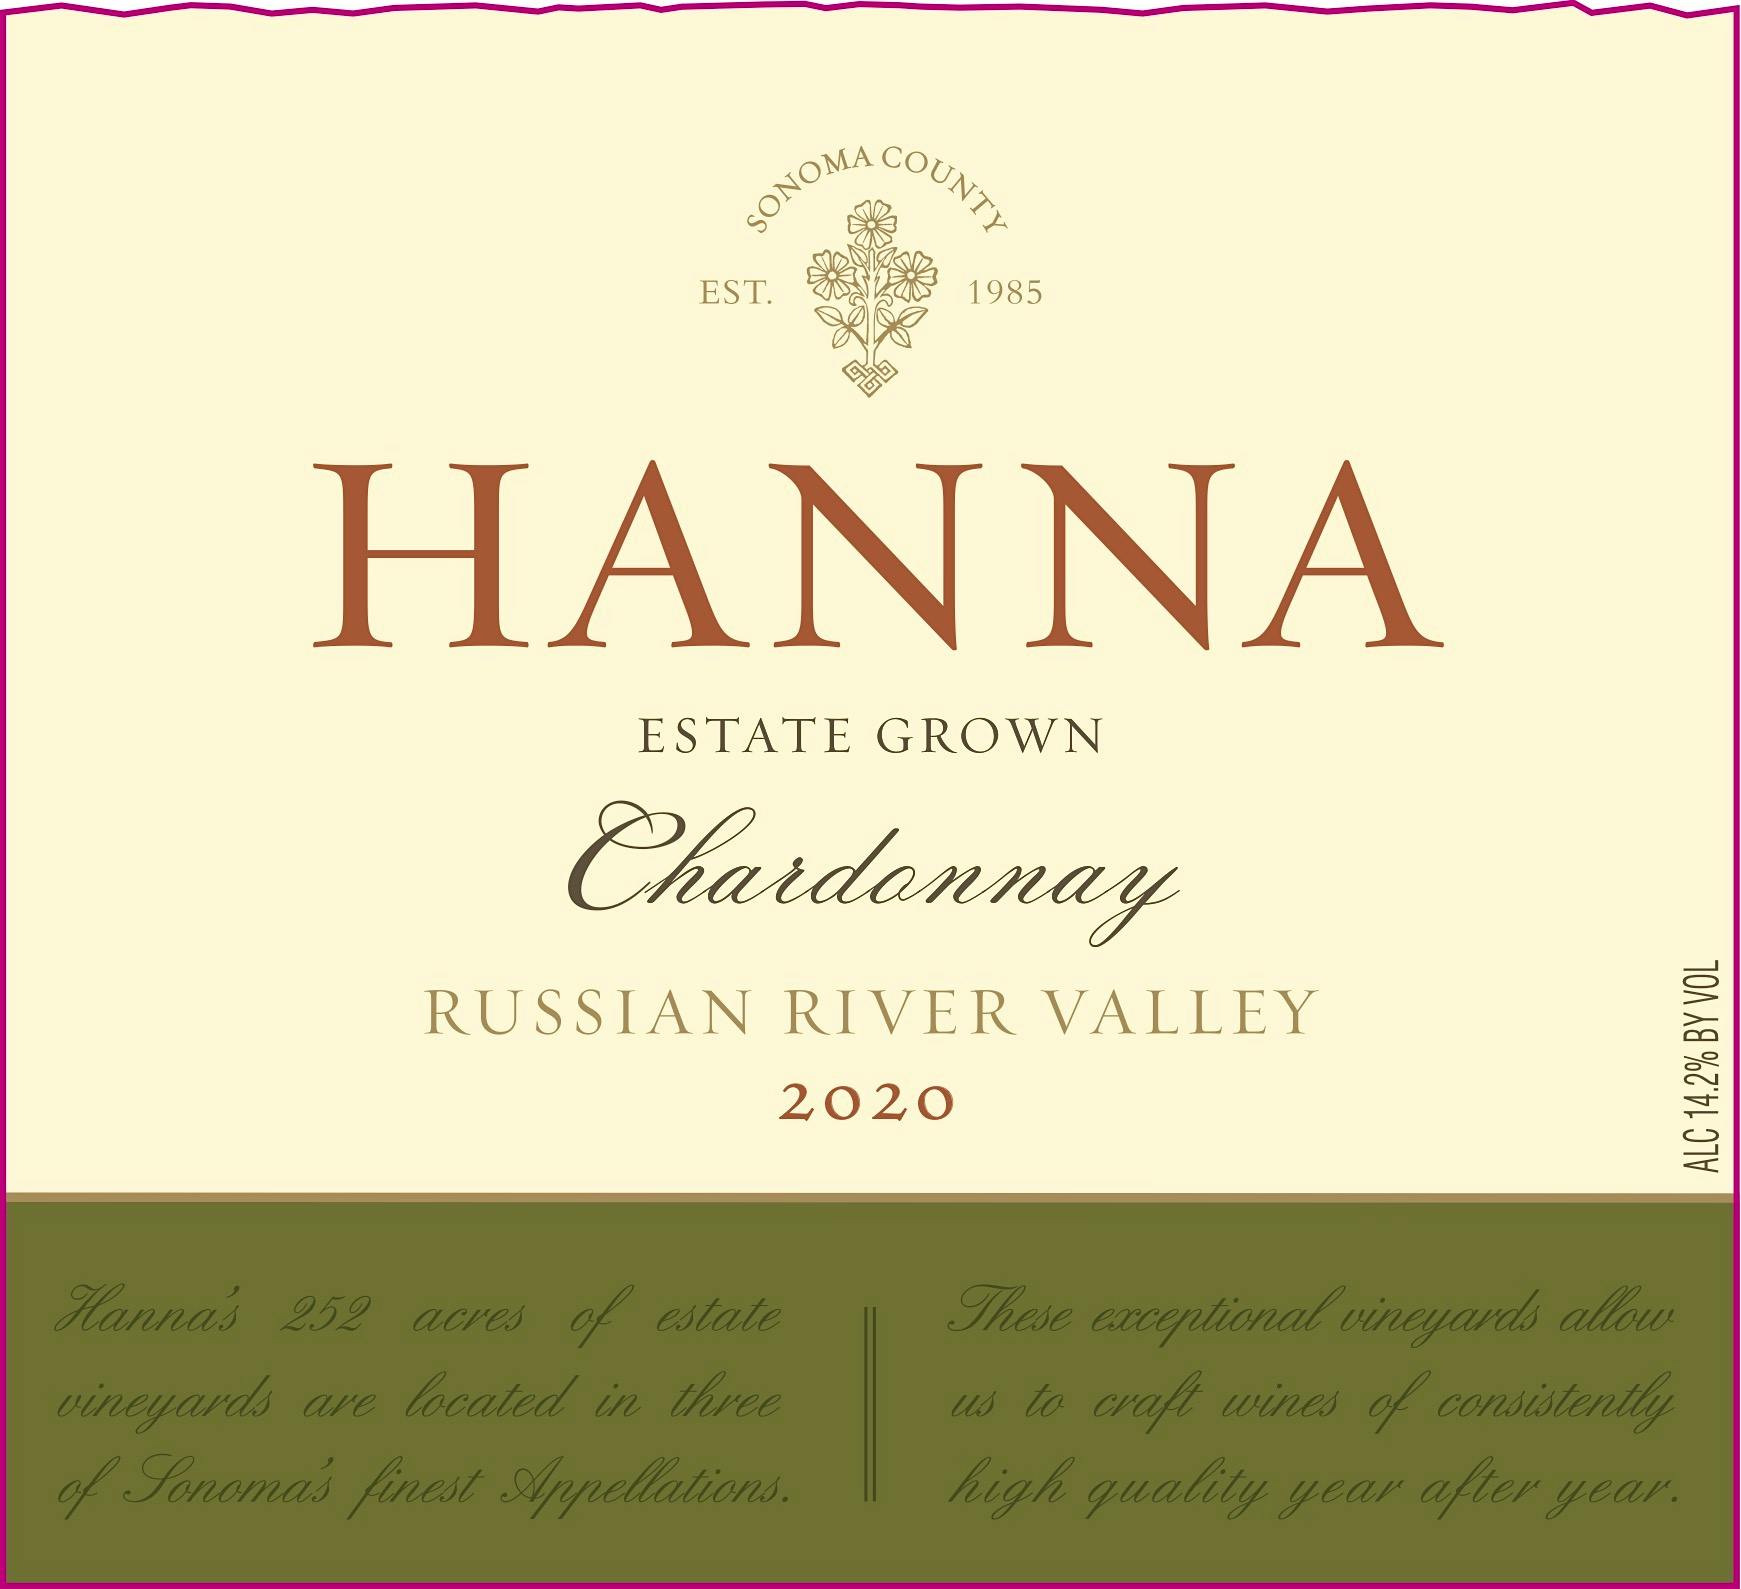 Label for Hanna